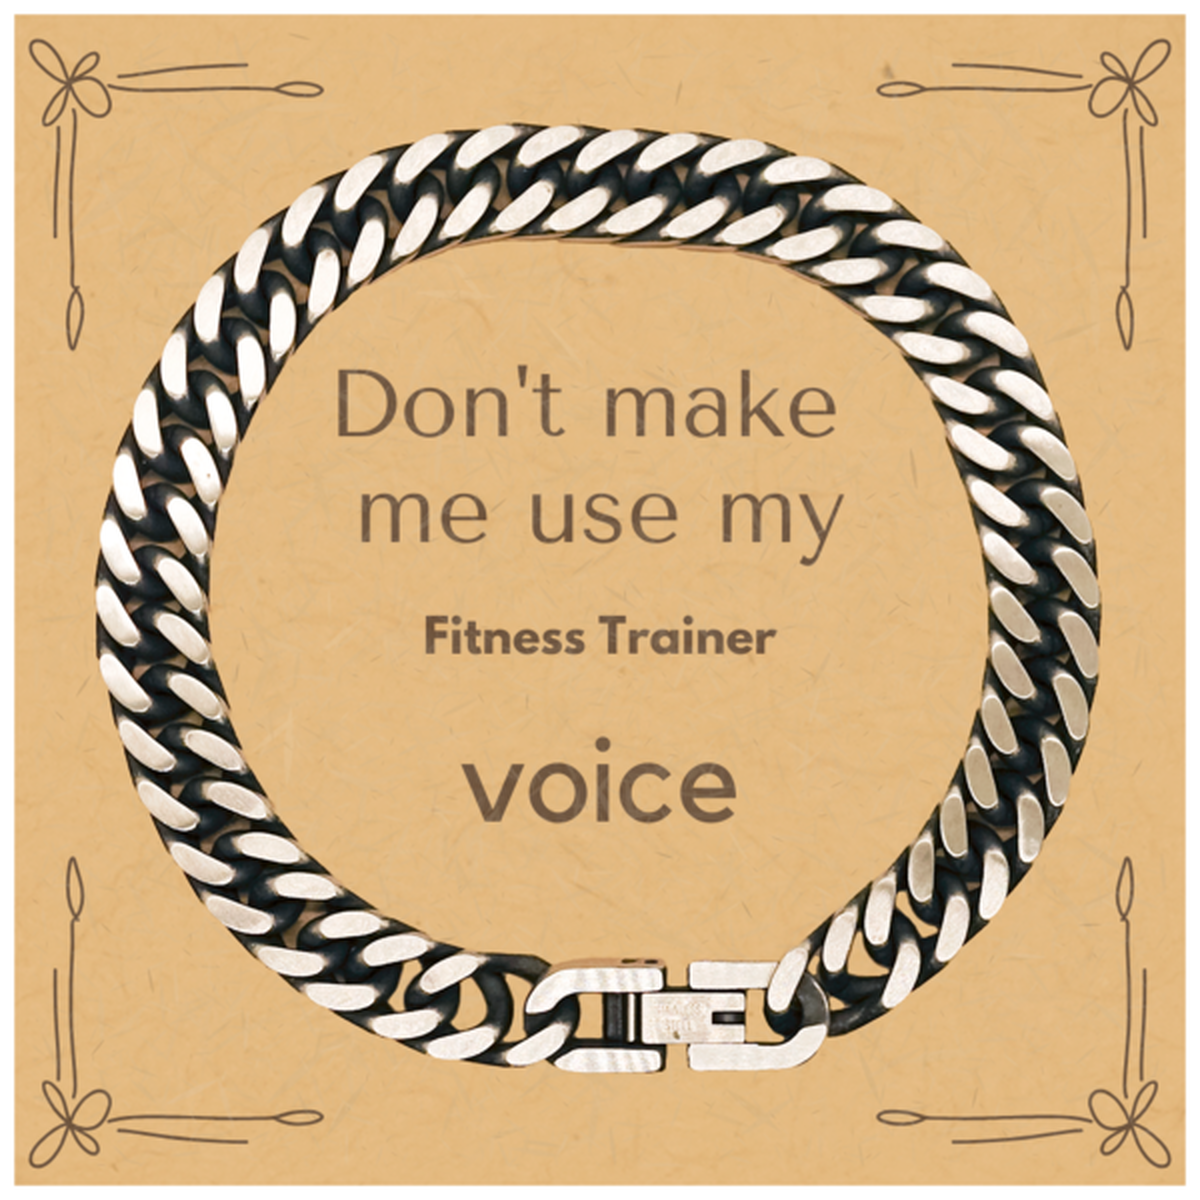 Don't make me use my Fitness Trainer voice, Sarcasm Fitness Trainer Card Gifts, Christmas Fitness Trainer Cuban Link Chain Bracelet Birthday Unique Gifts For Fitness Trainer Coworkers, Men, Women, Colleague, Friends